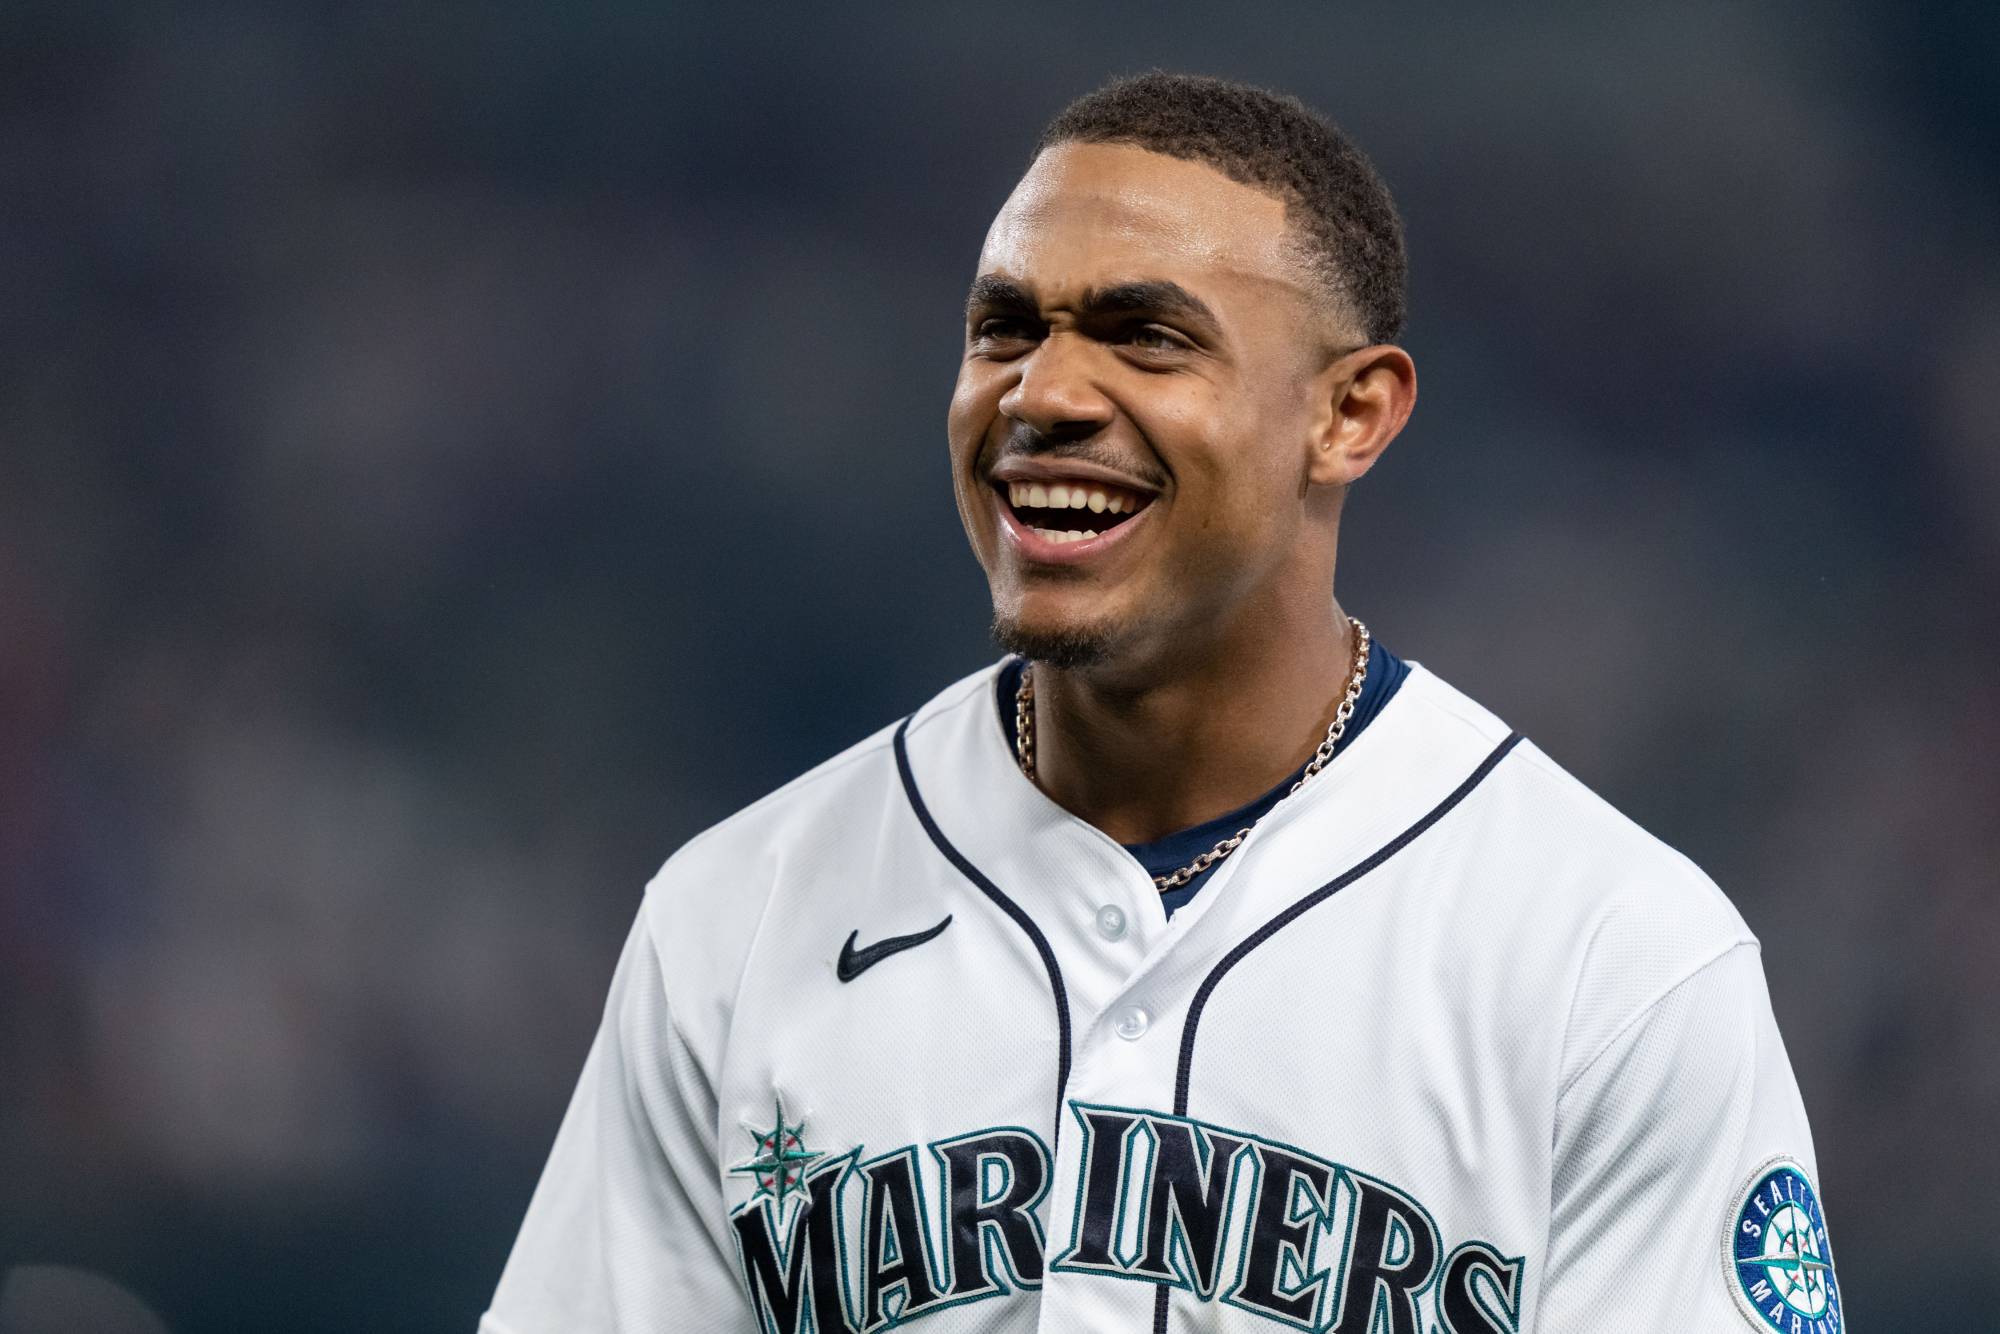 Mariners rookie Julio Rodriguez named to AL All-Star team at 21 years old